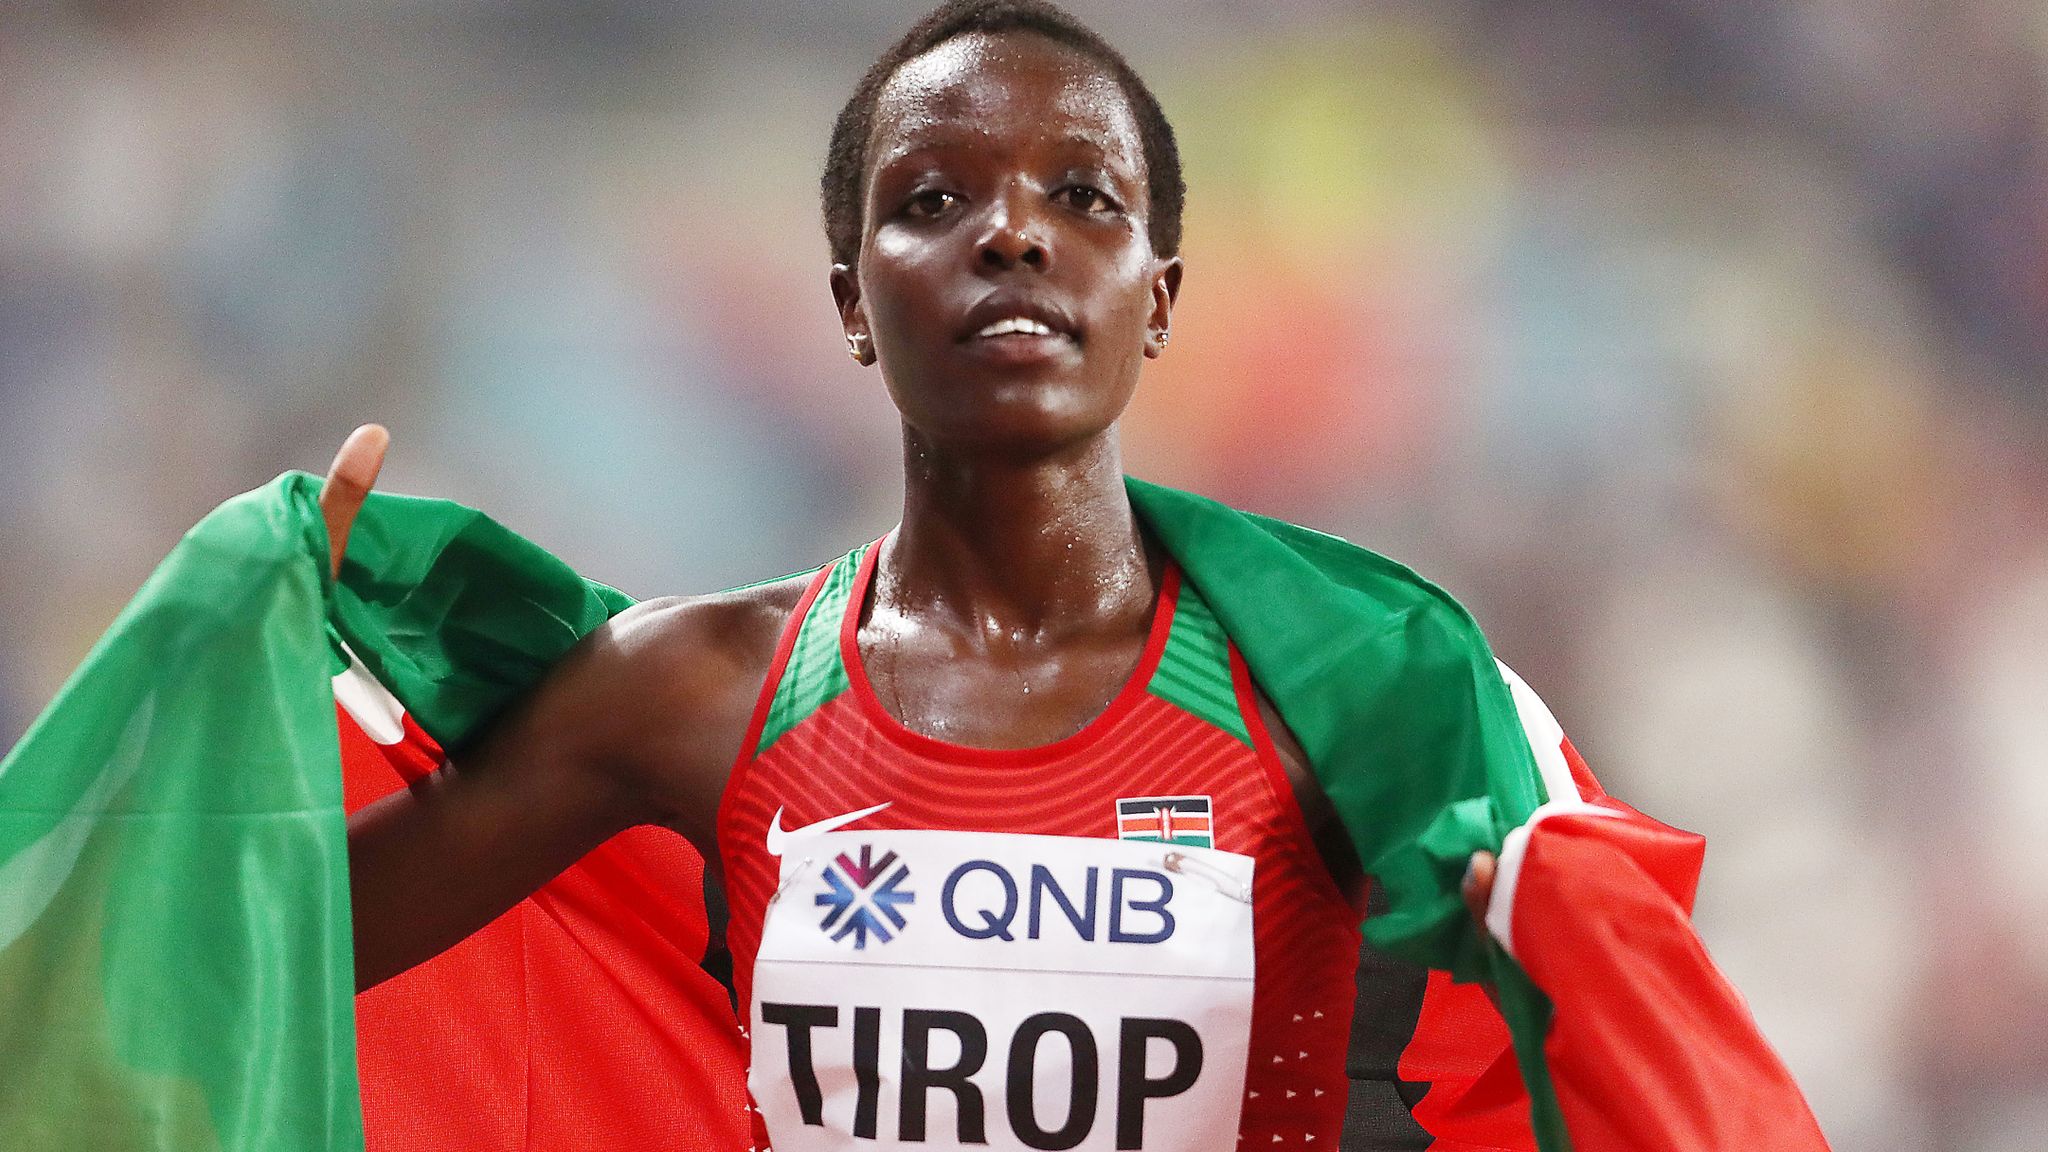 Husband of Slain Kenyan Olympic Runner Agnes Tirop is Charged With Her Murder